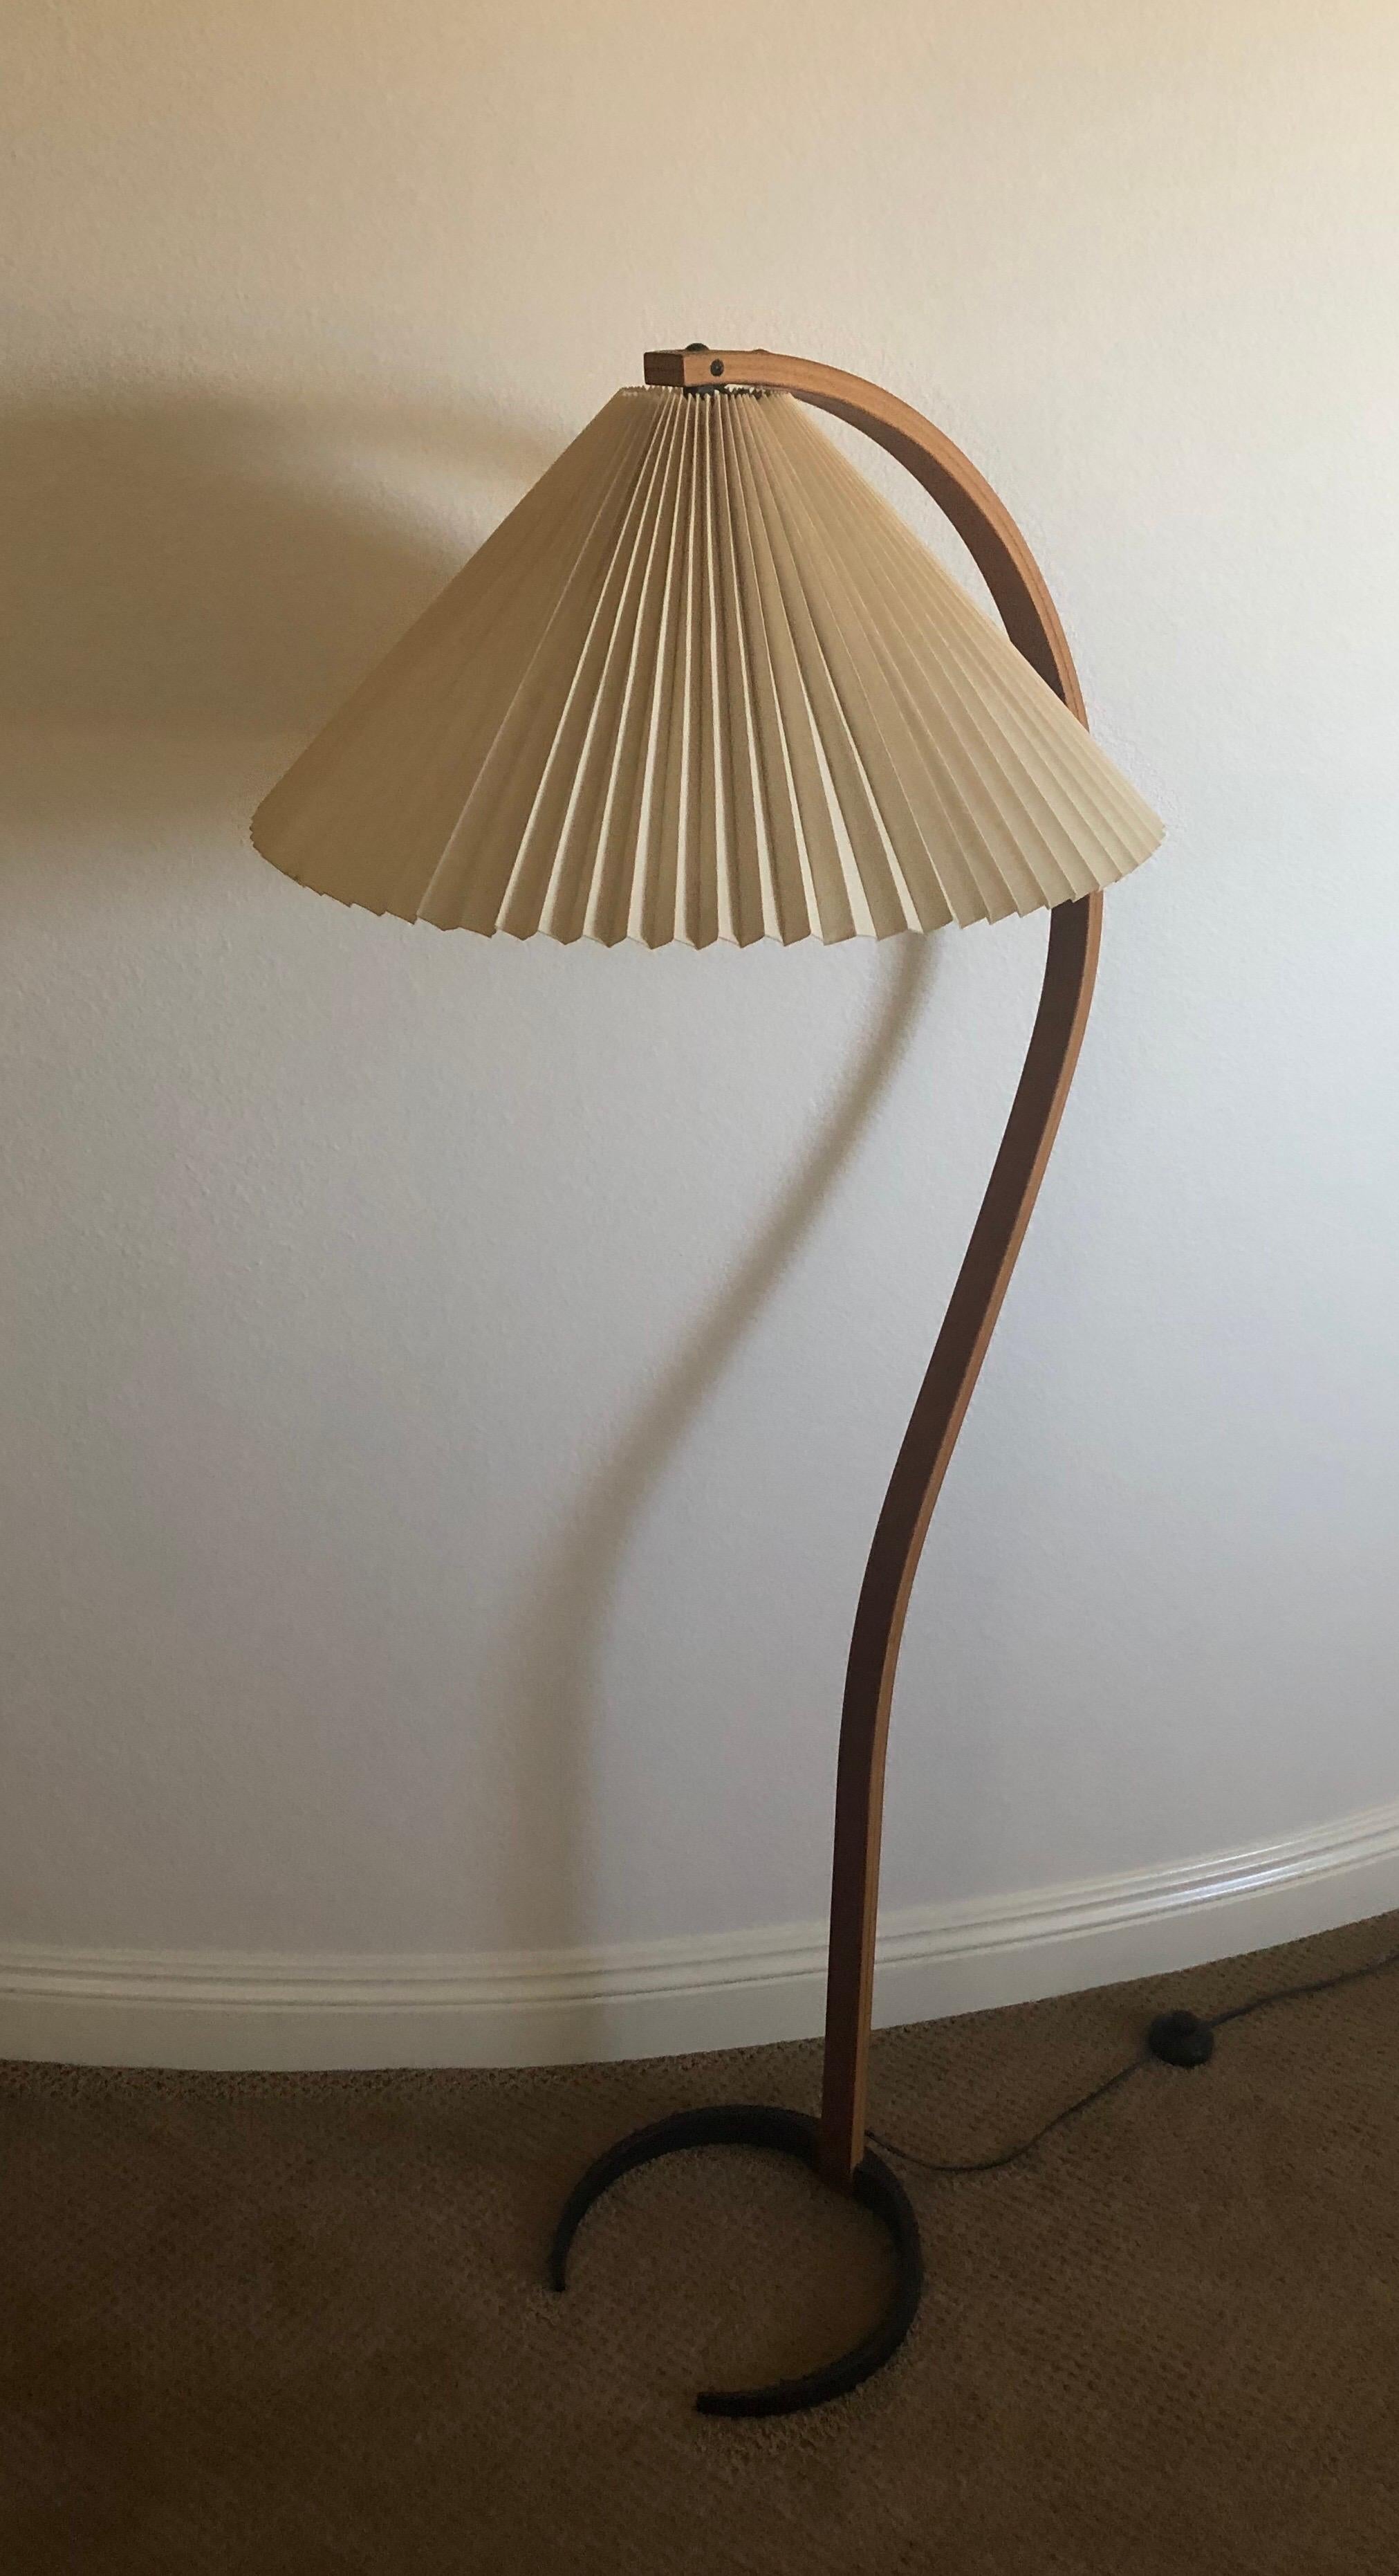 Super cool Danish modern bentwood floor lamp by Caprani Light AS., circa early 1970s.

The veneered bentwood lamp sits on a crescent black iron base and retains the original tan shade. The piece is signed on the base and in very good vintage